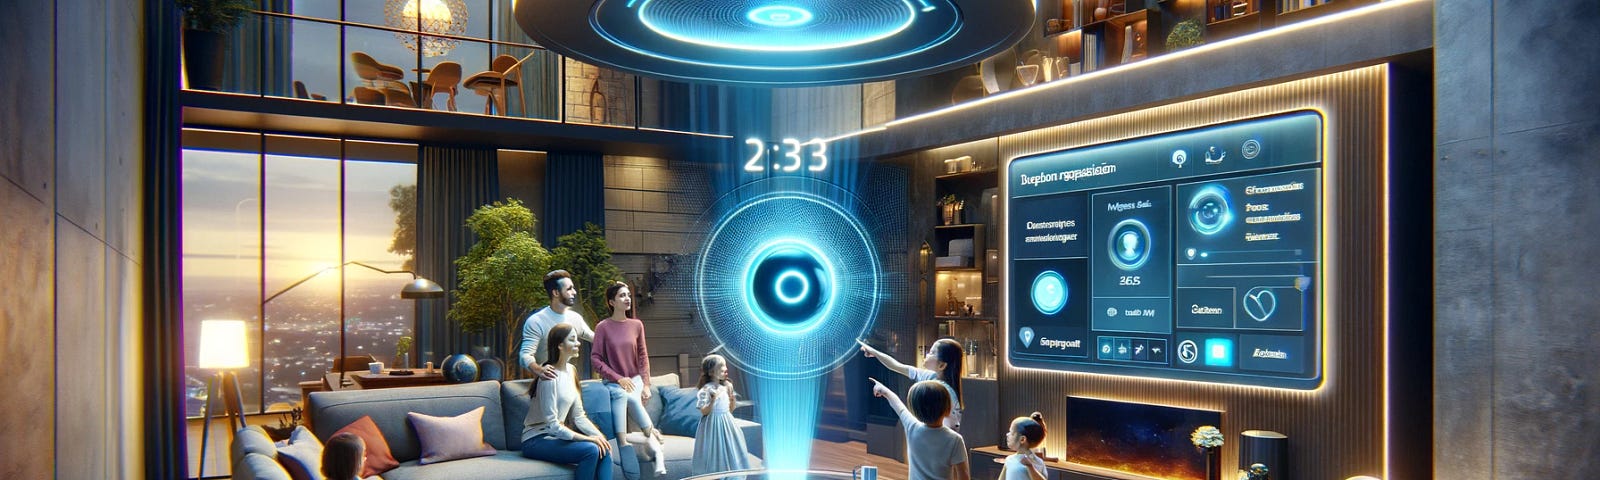 A glimpse into the future: Family time redefined by voice assistant technology, bringing us closer to a world where conversations with AI enrich our daily lives.